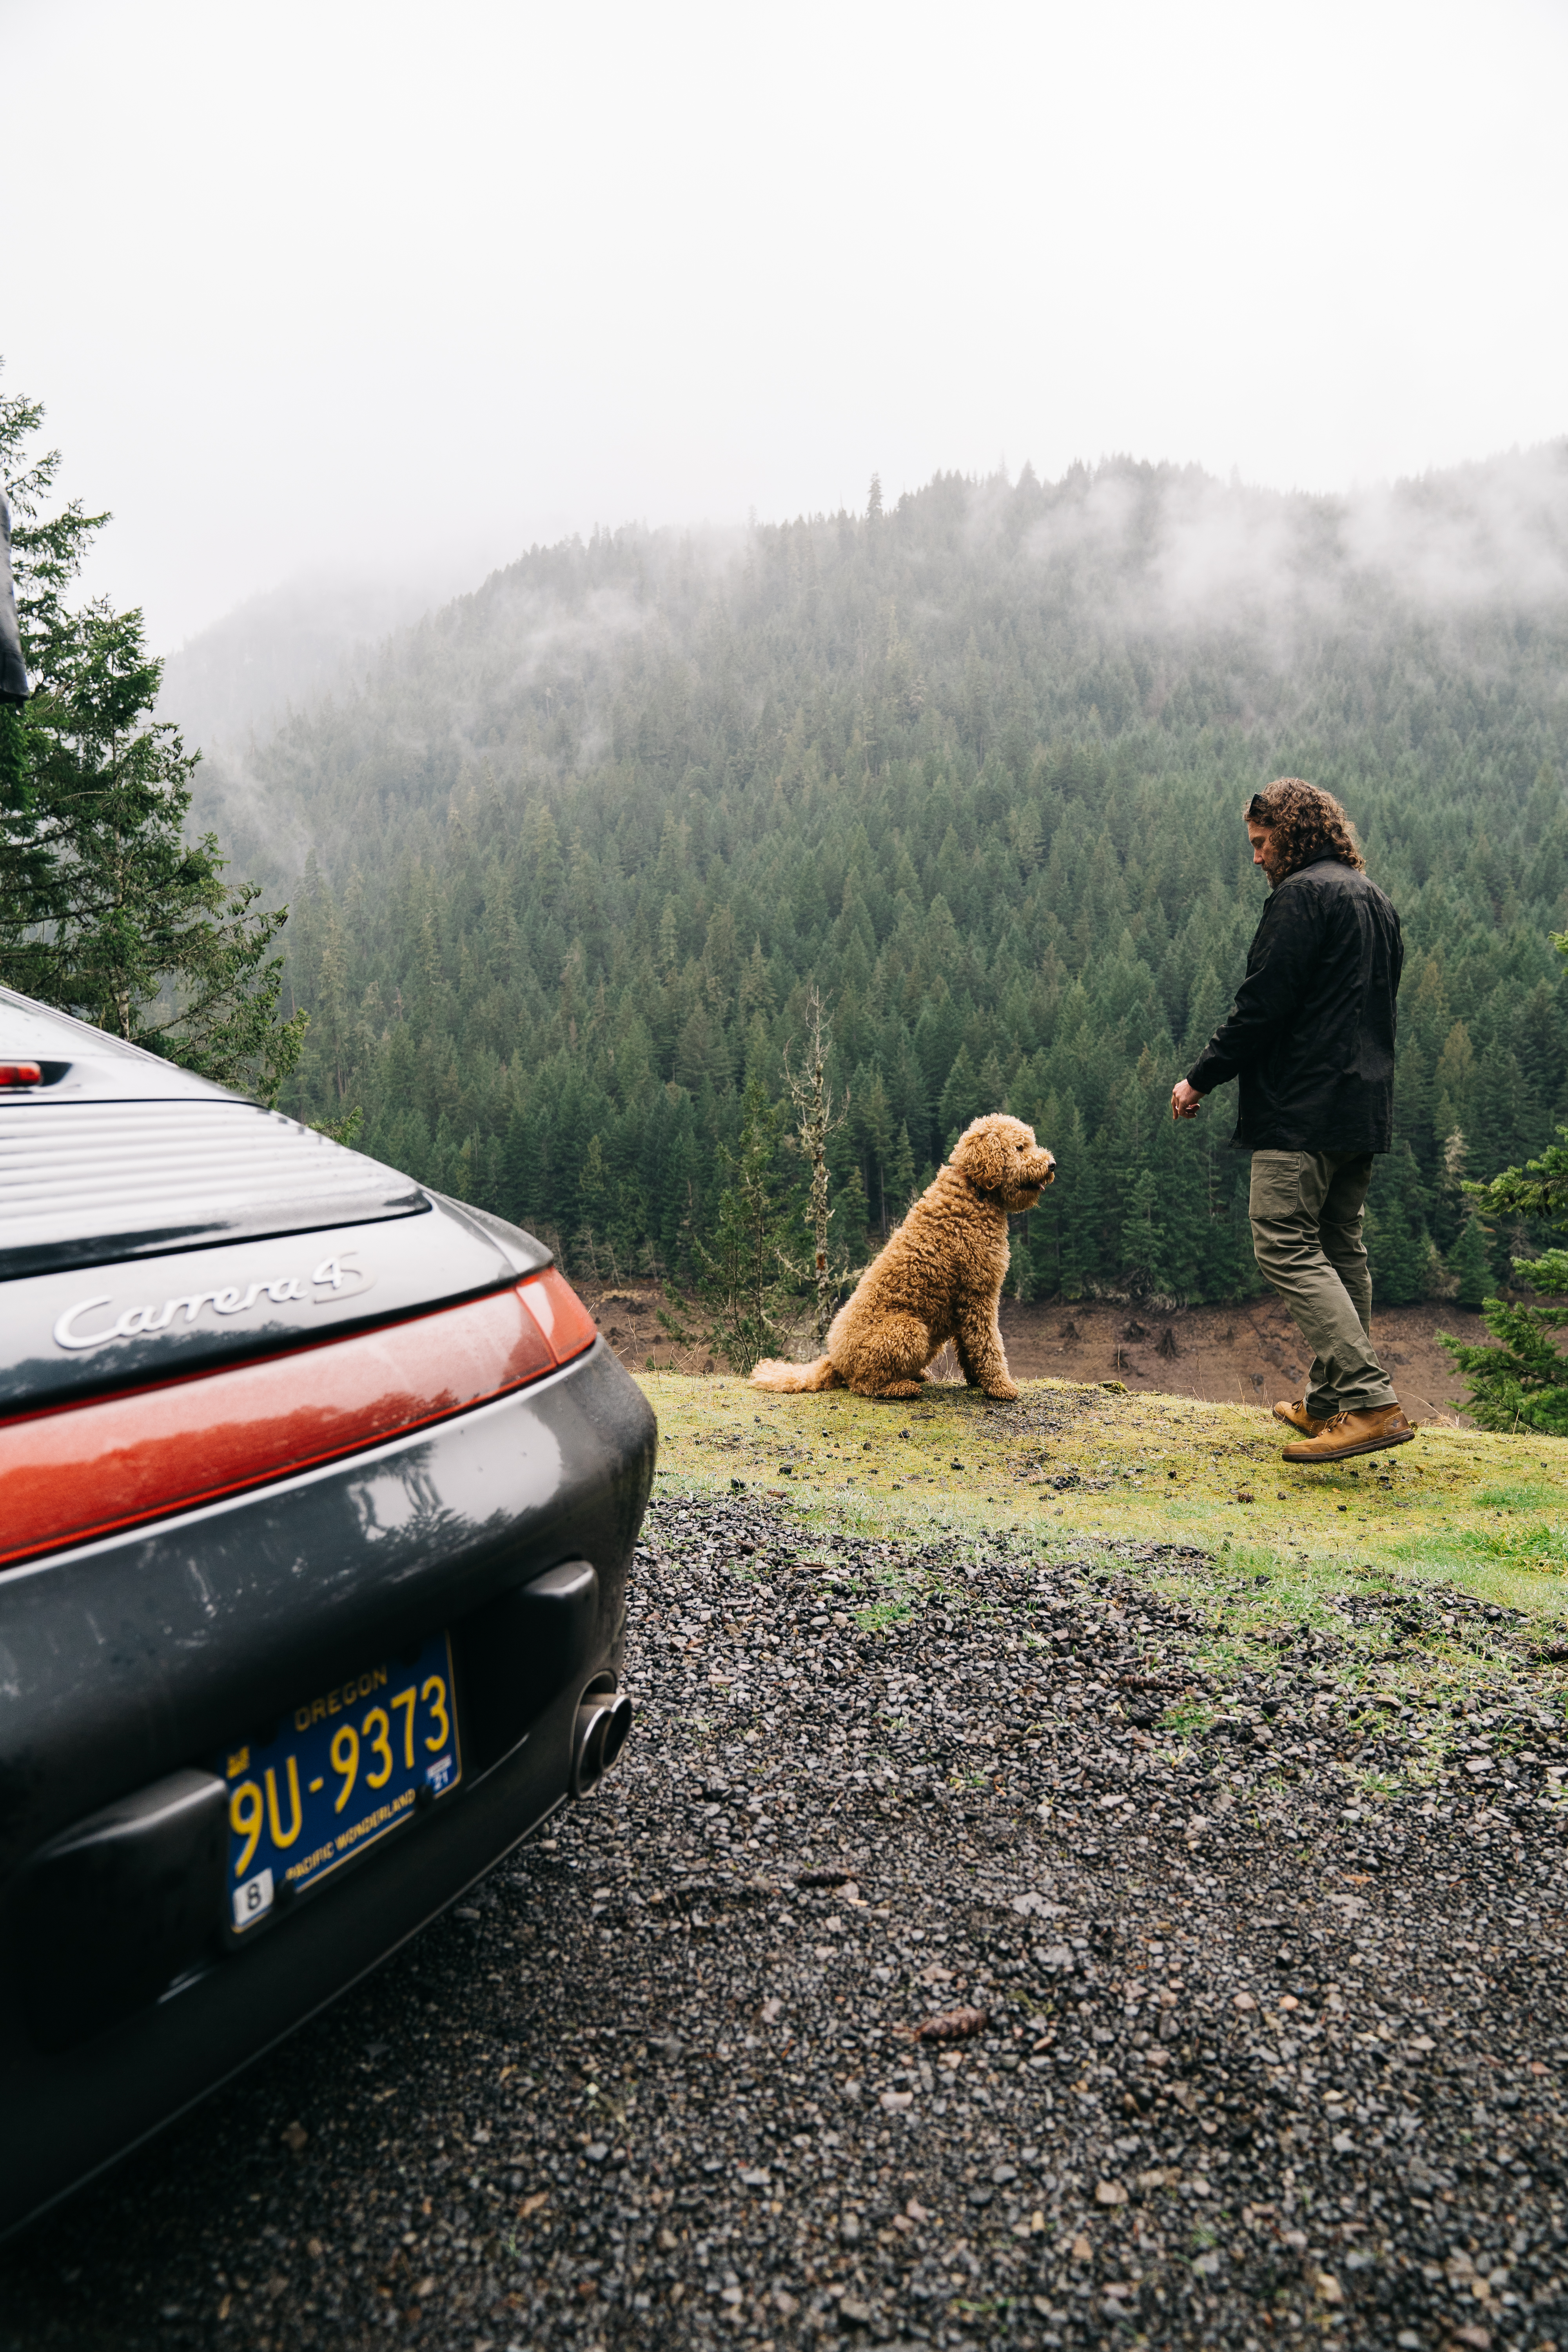 Man and dog beside a forest, Porsche 911 in foreground